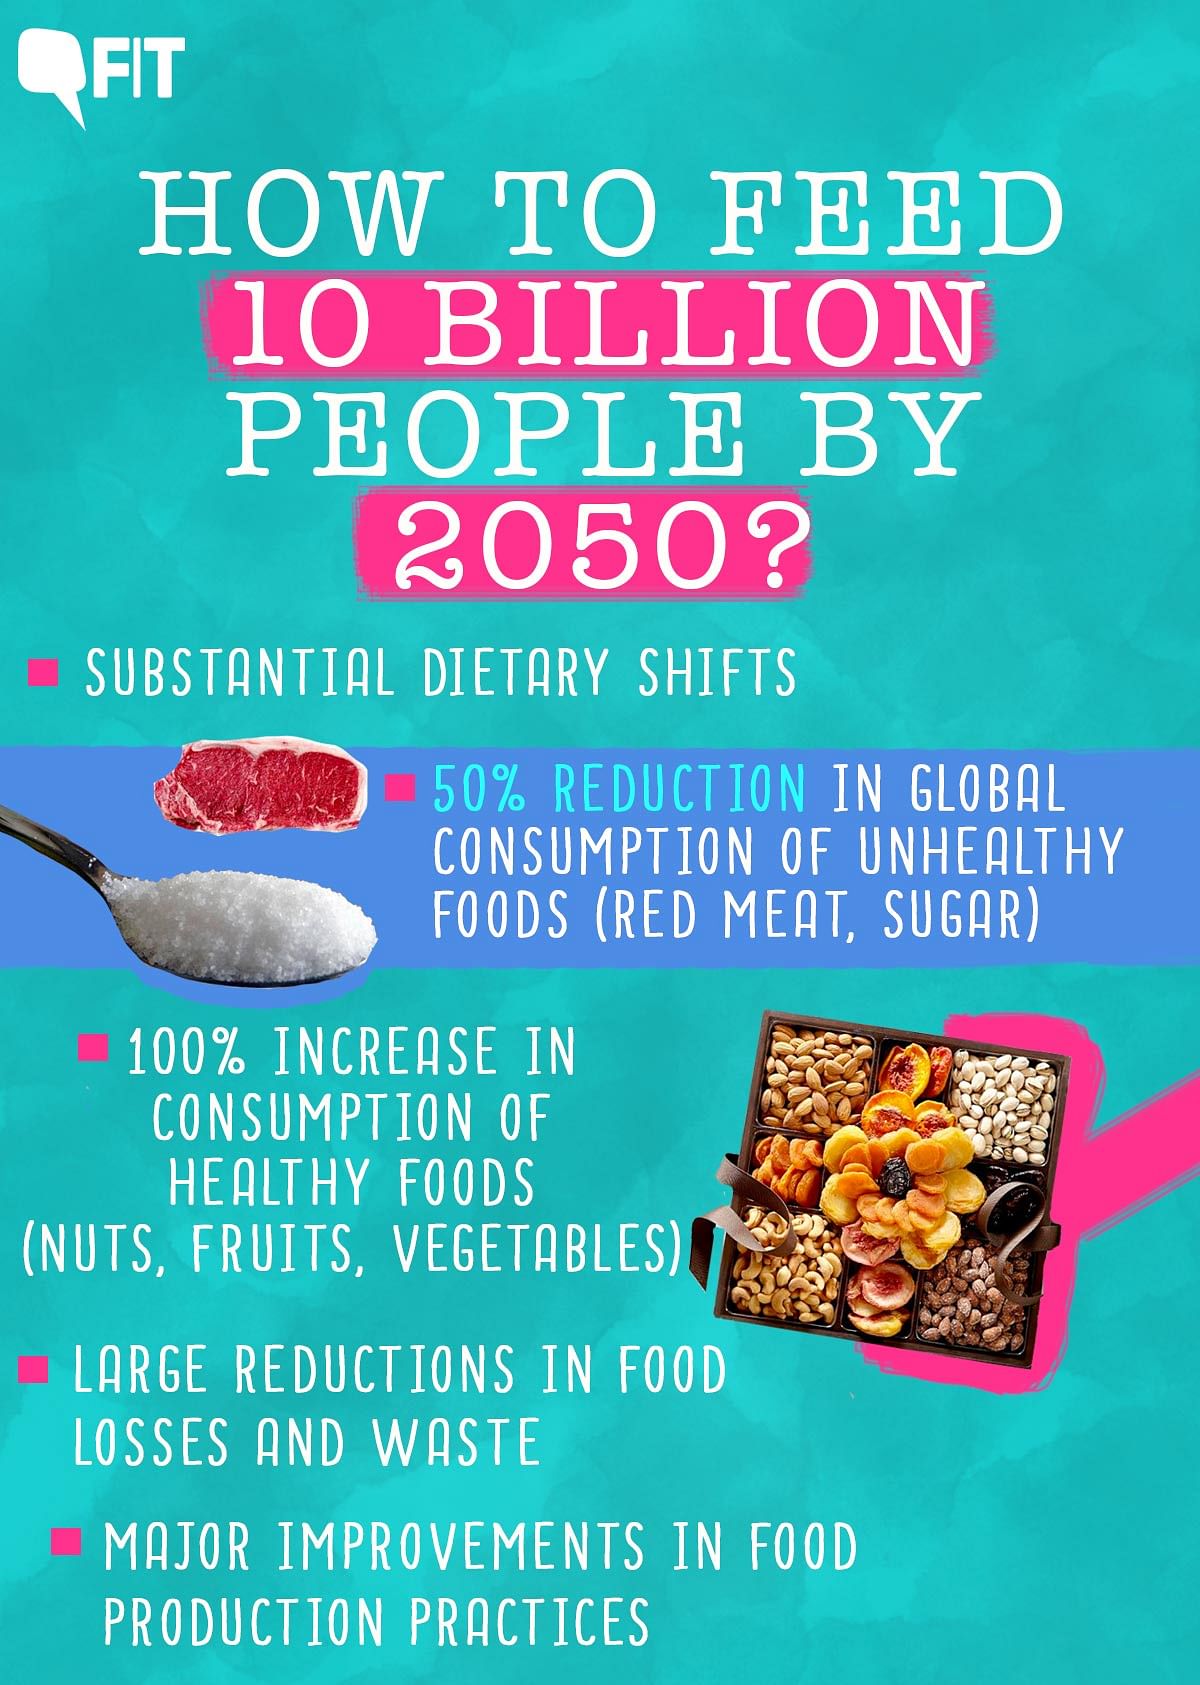 The Planetary Health diet recommends doubling the average global consumption of nuts, fruits, vegetables & legumes. 